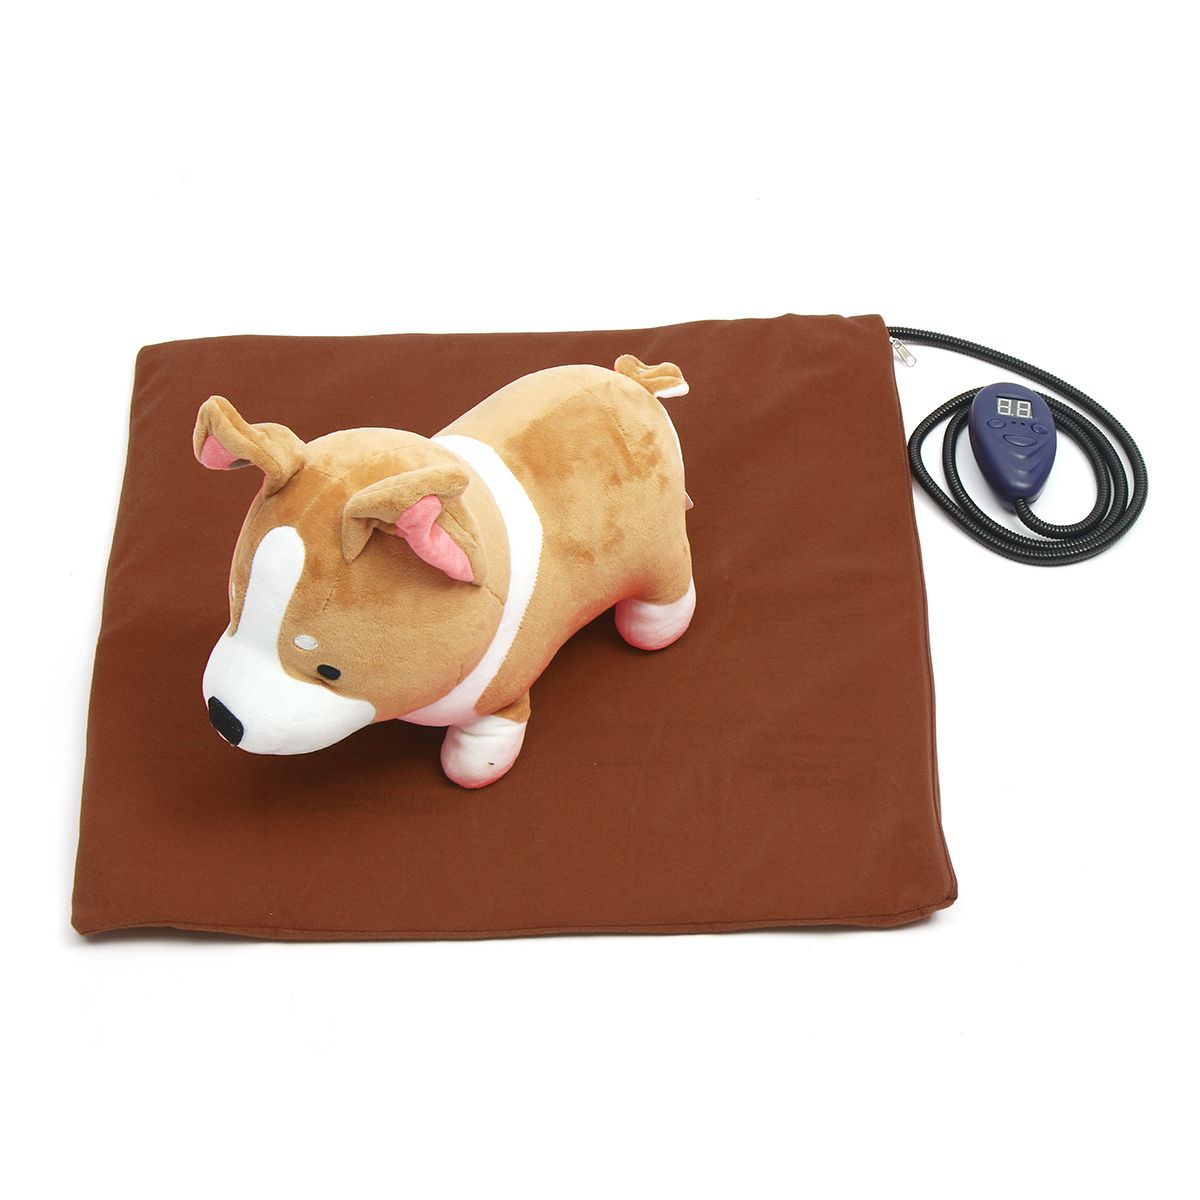 30x40cm-Electric-Heating-Heater-Heated-Bed-Mat-Pad-Blanket-without-Cable-For-Pet-Dog-Cat-Rabbit-1317920